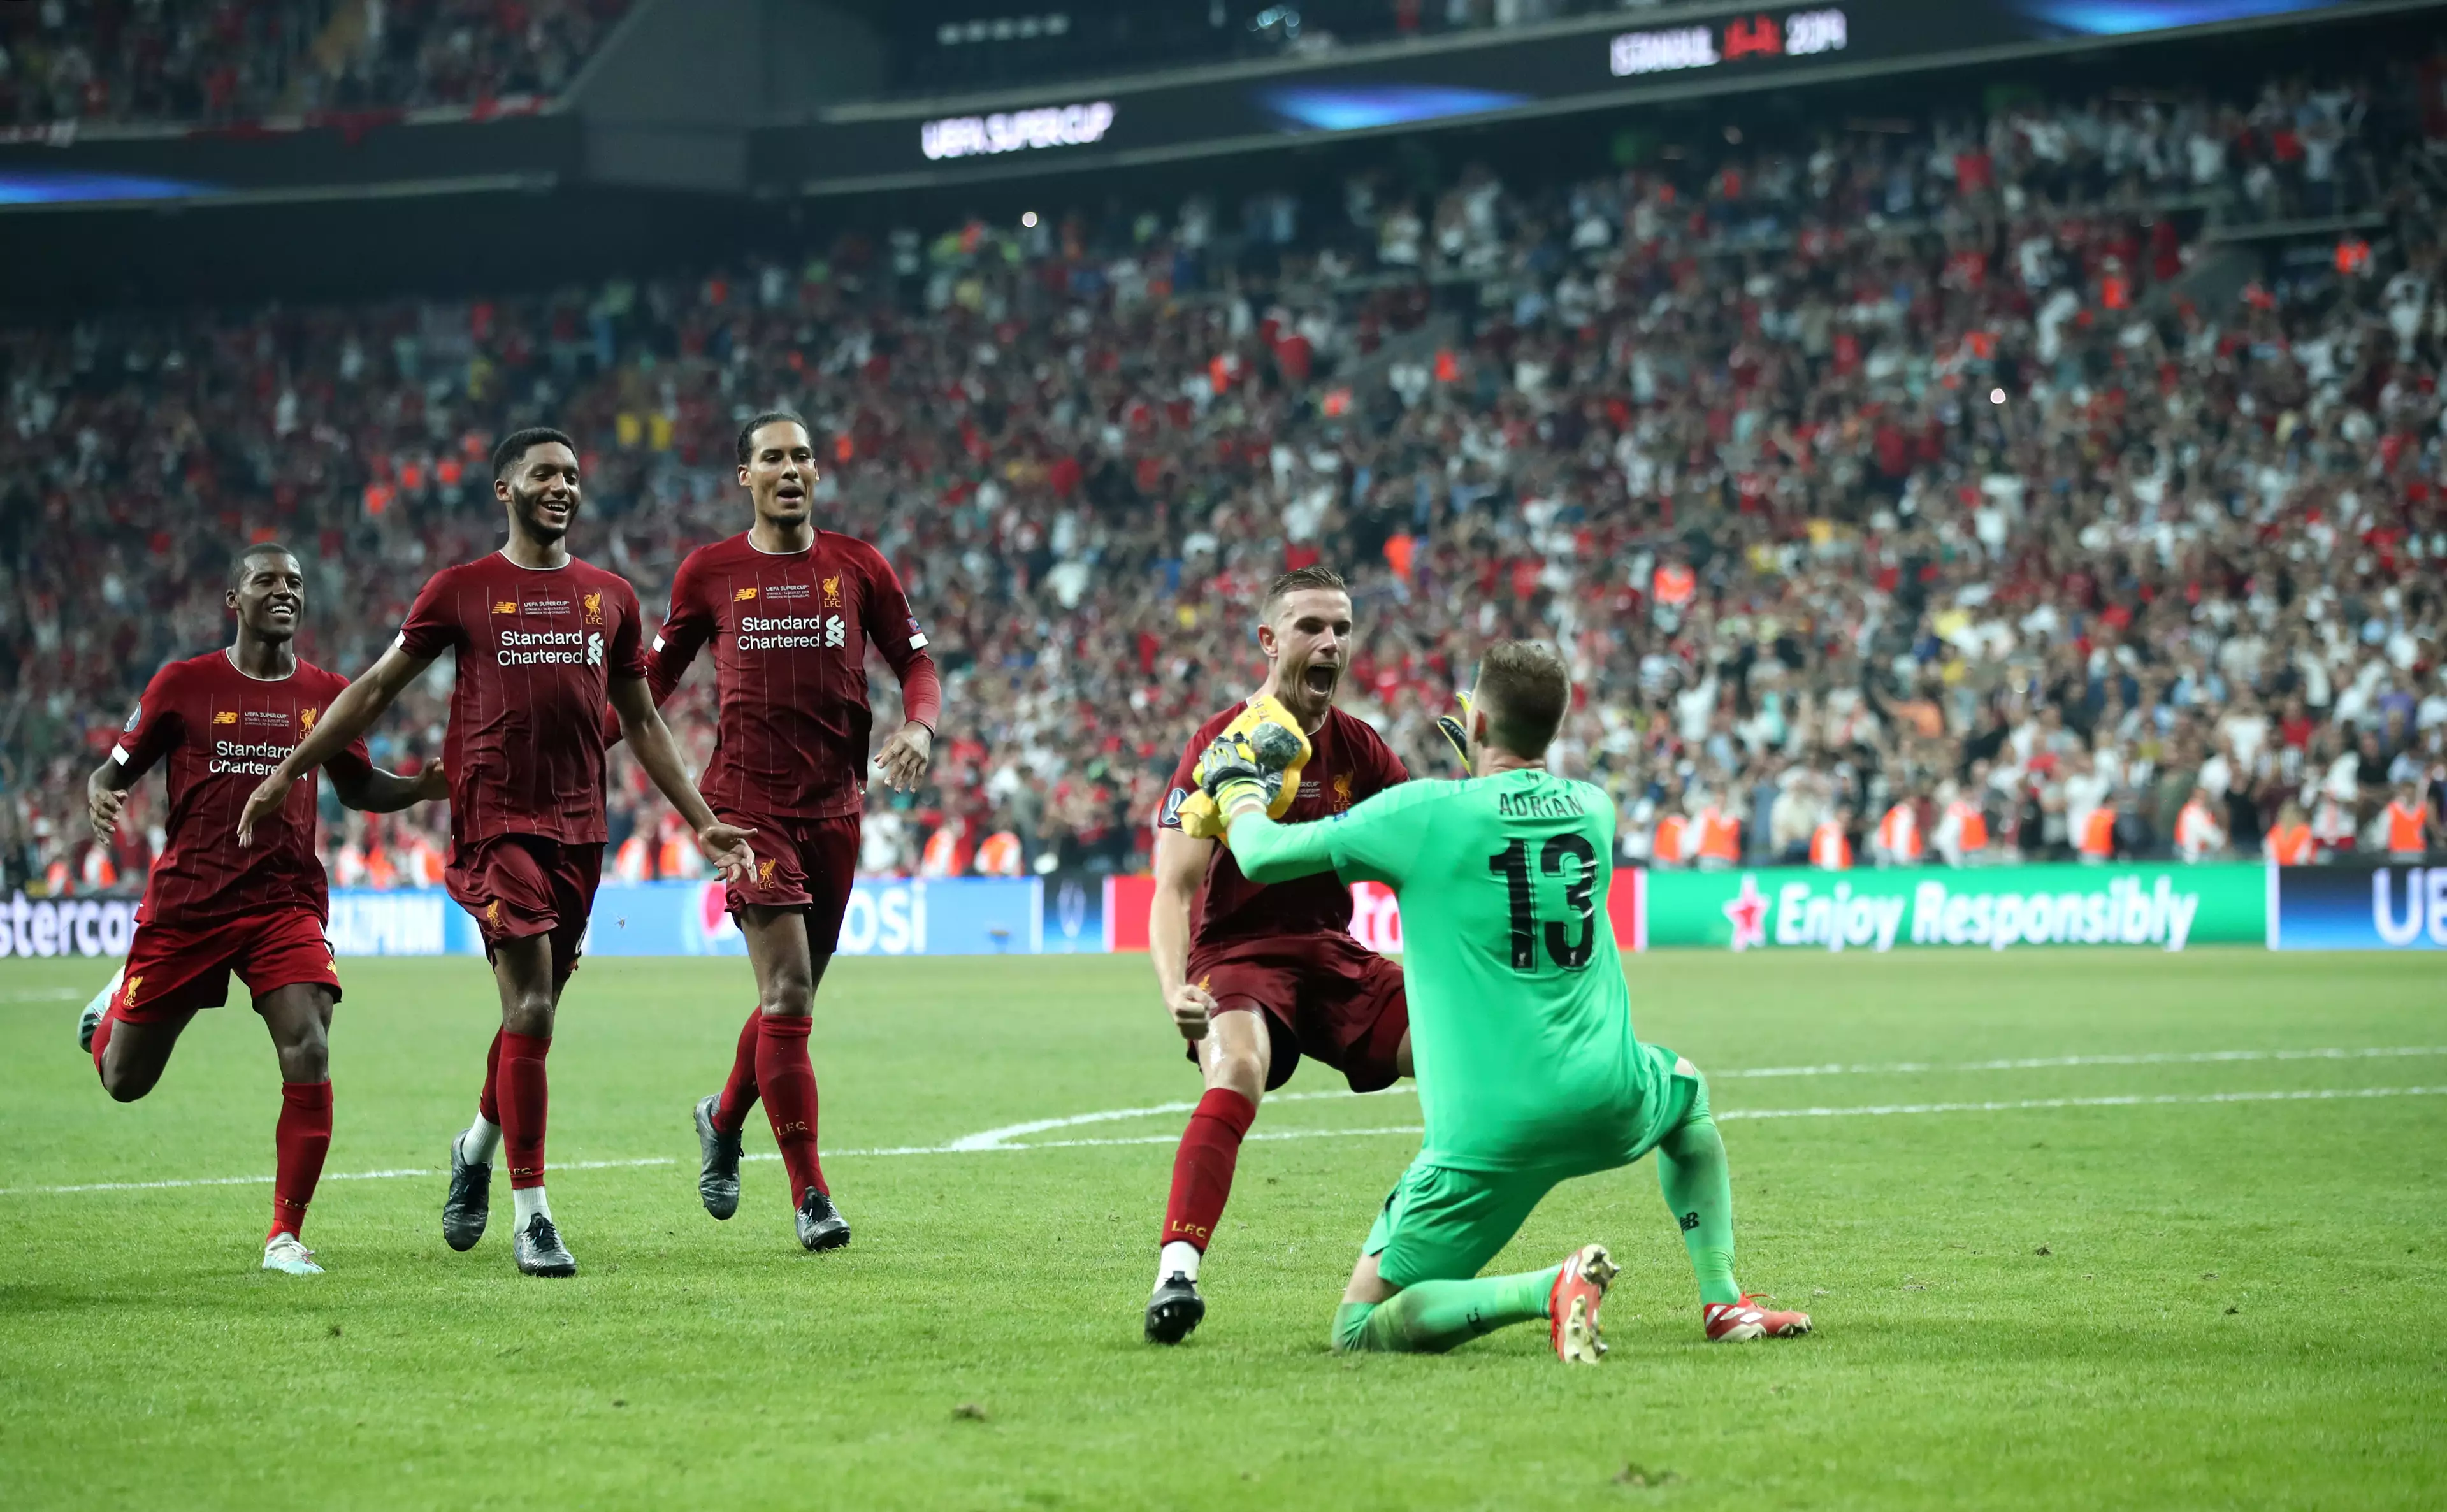 Adrian was the hero as Liverpool beat Chelsea on penalties to win the UEFA Super Cup